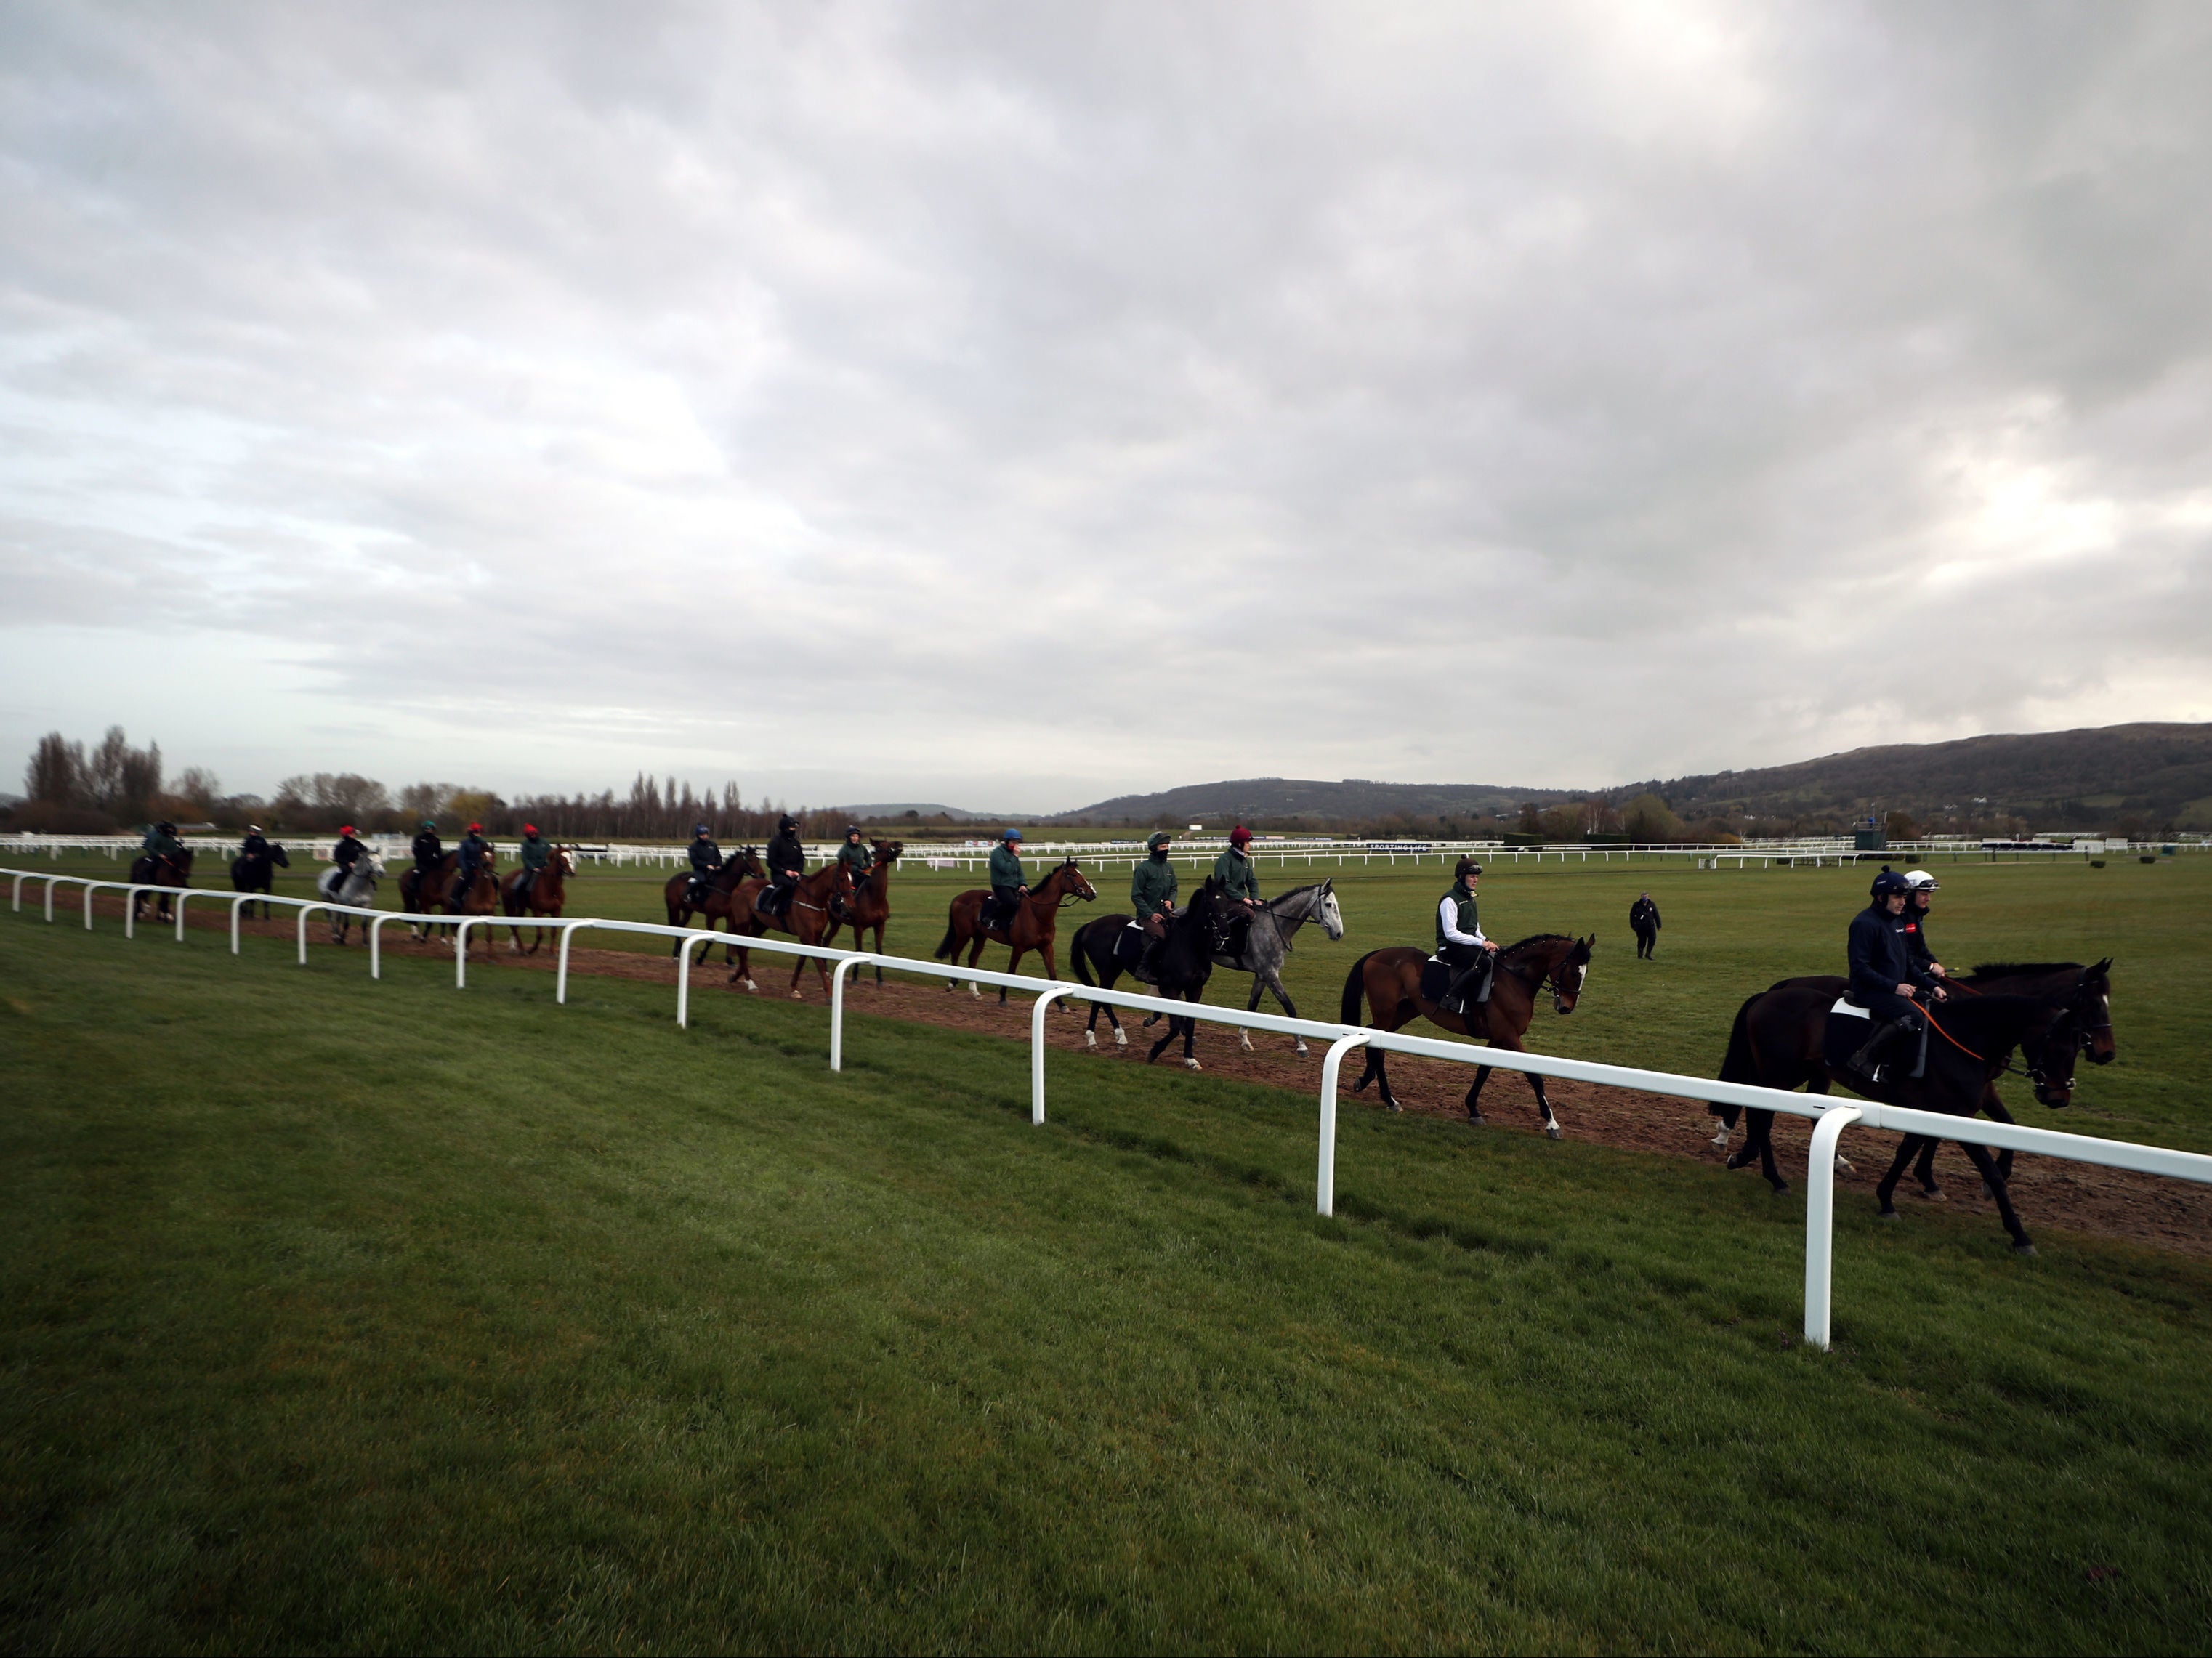 Willie Mullins' stable on the gallops at Cheltenham Racecourse